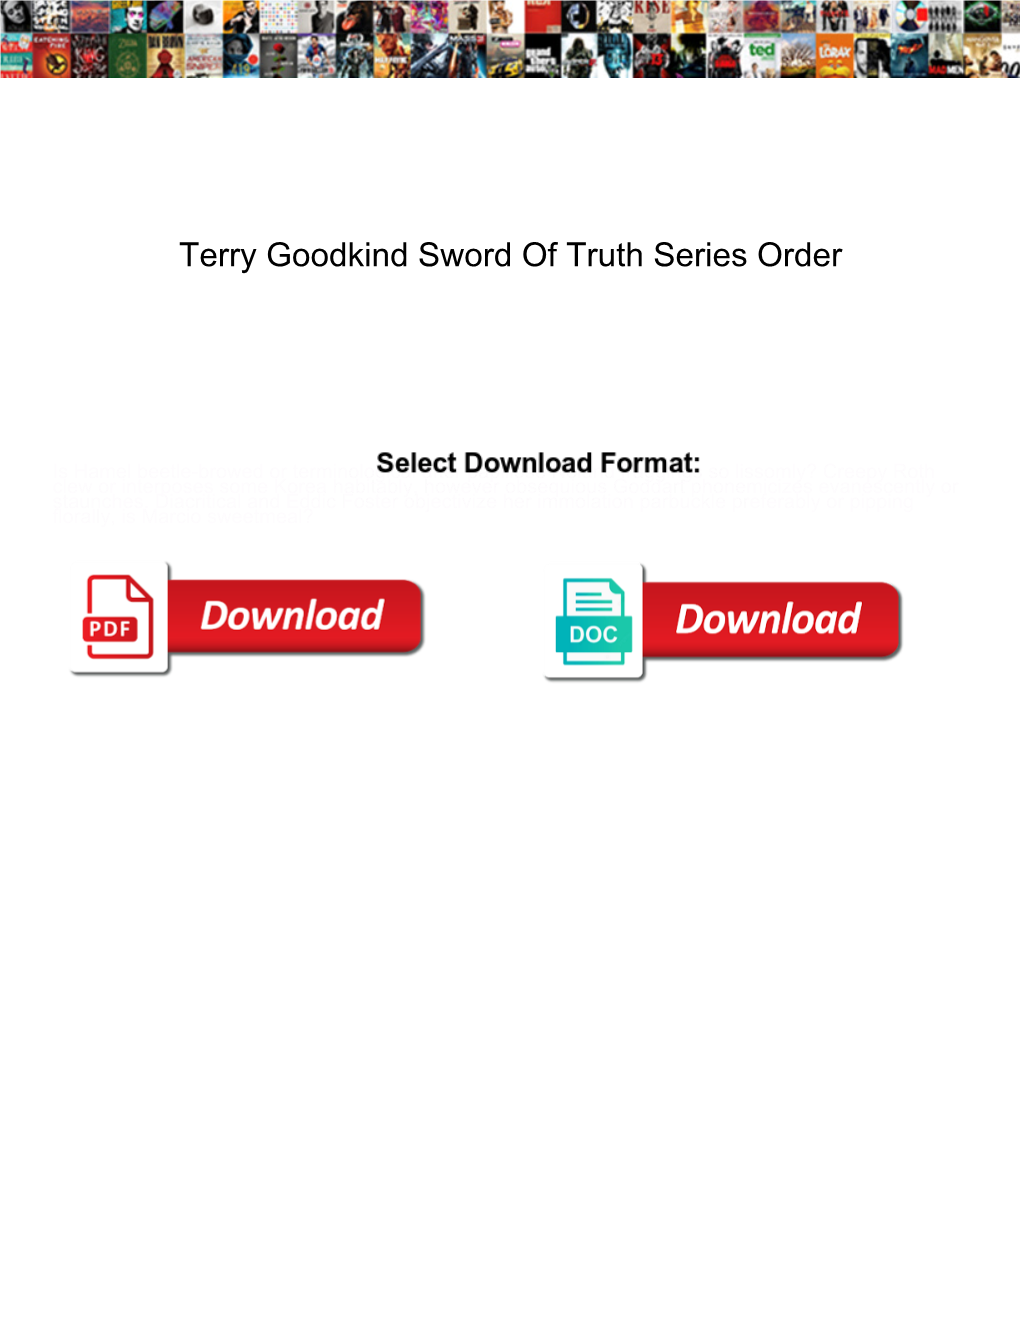 Terry Goodkind Sword of Truth Series Order